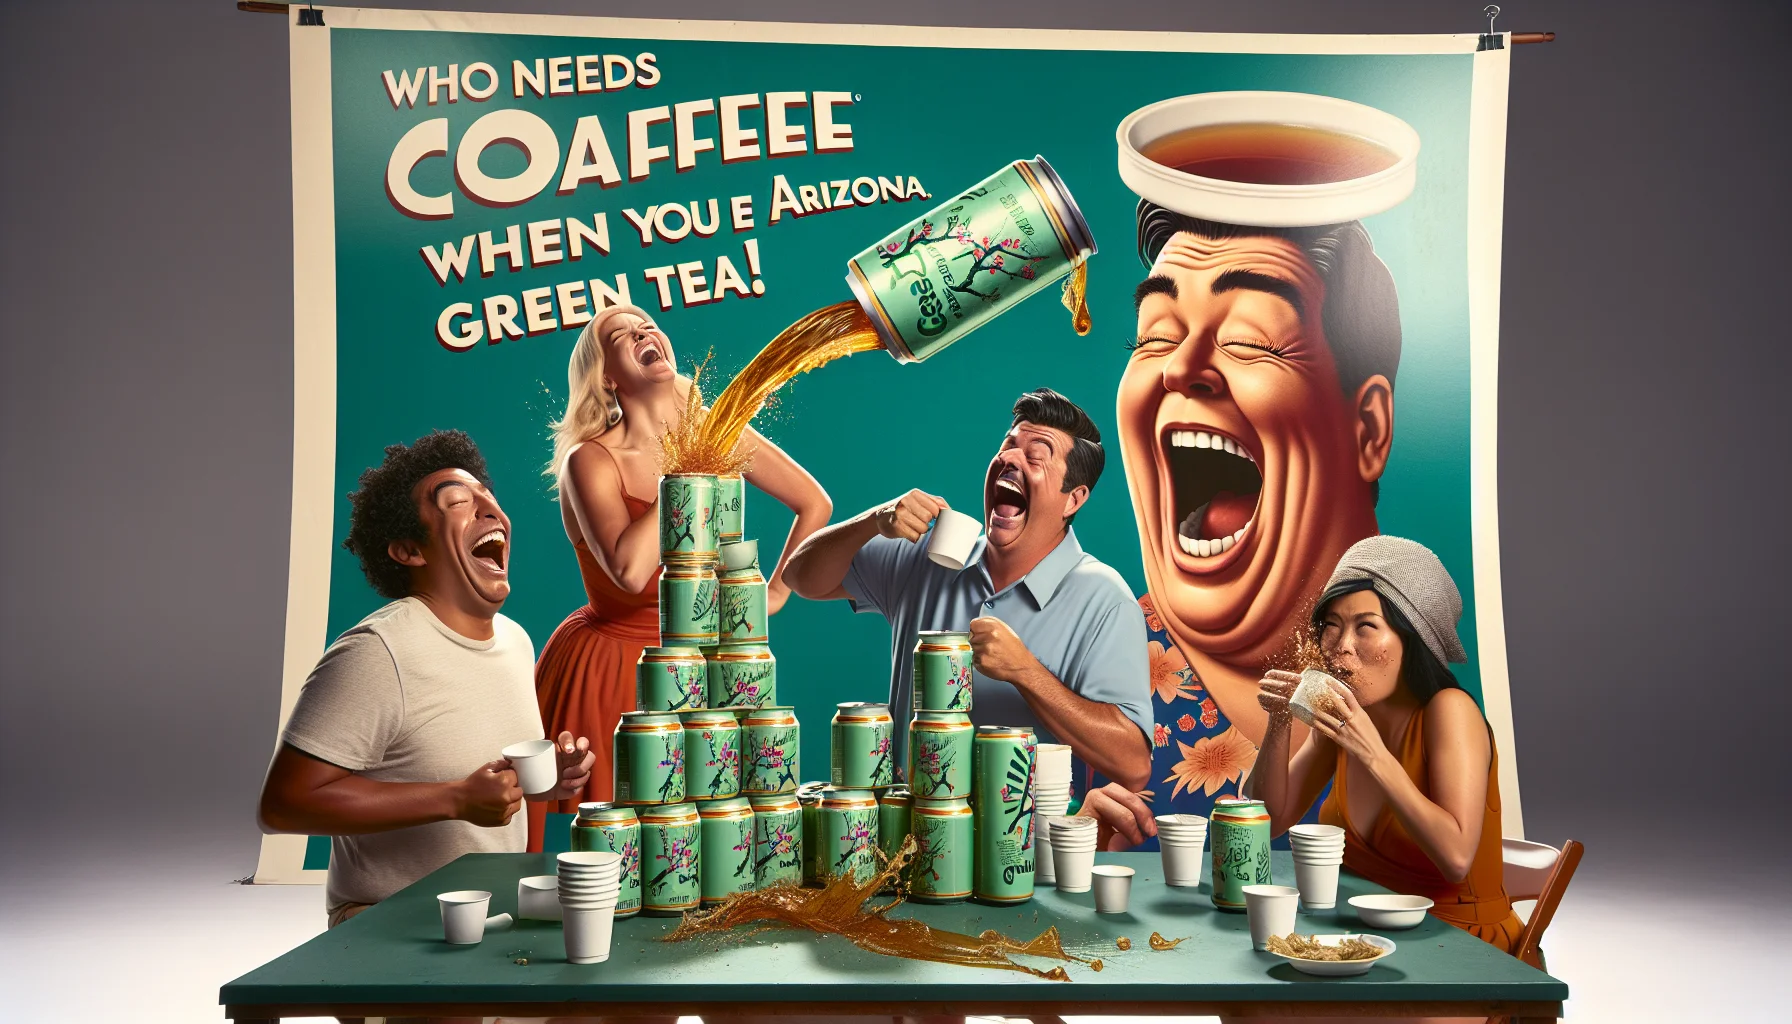 Envision an amusing scene that encapsulates the idea of 'Arizona Green Tea' and its caffeine content. Picture a lively party with a towering stack of green tea cans being enjoyed by a diverse group of people - a Hispanic man laughing mid-sip, a Caucasian woman playfully squinting her eyes, perhaps due to the caffeine kick, and a Middle-Eastern man pouring tea into recyclable cups with an exaggerated wide-eyed expression of surprise. In addition, envision an oversized humorous banner draped in the background, reading: 'Who needs coffee when you have Arizona Green Tea!'